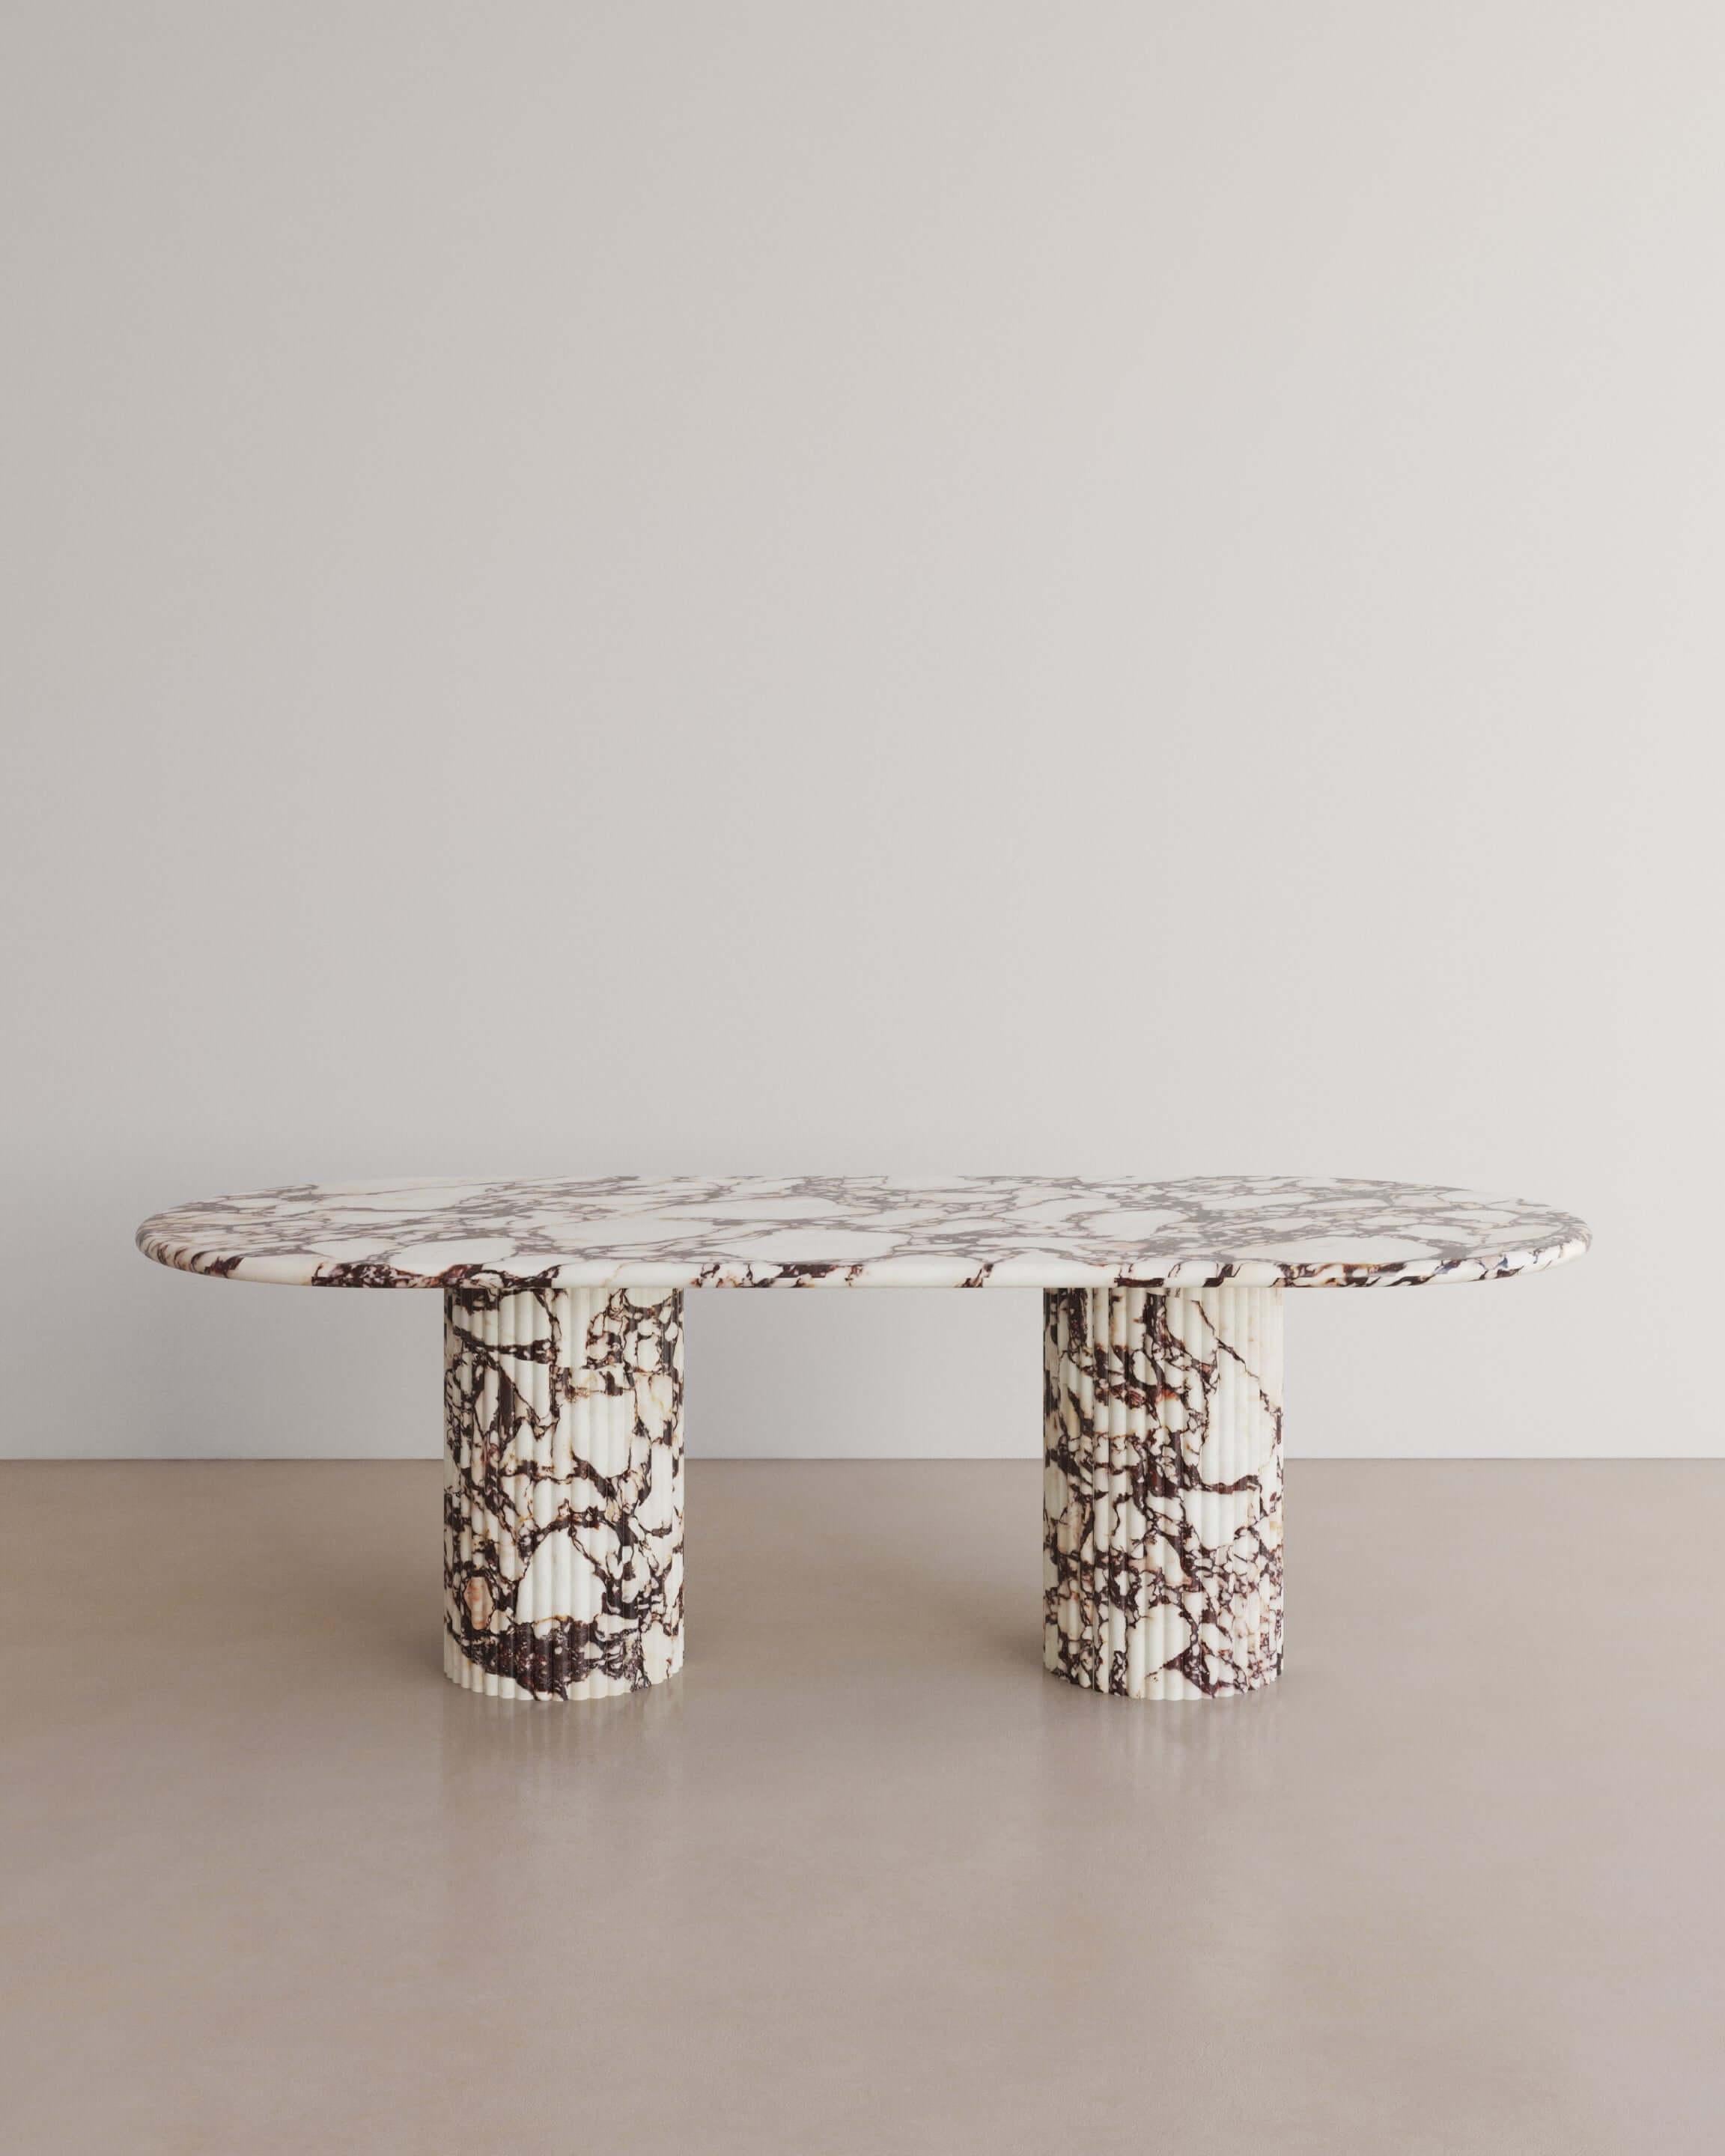 The Essentialist brings you The Antica Dining Table II in Calacatta Viola Marble. An oval table top resolved by smooth bullnose edges rests on two supporting pillars. Architectural form is refined by artistic expression echoing Roman culture. This